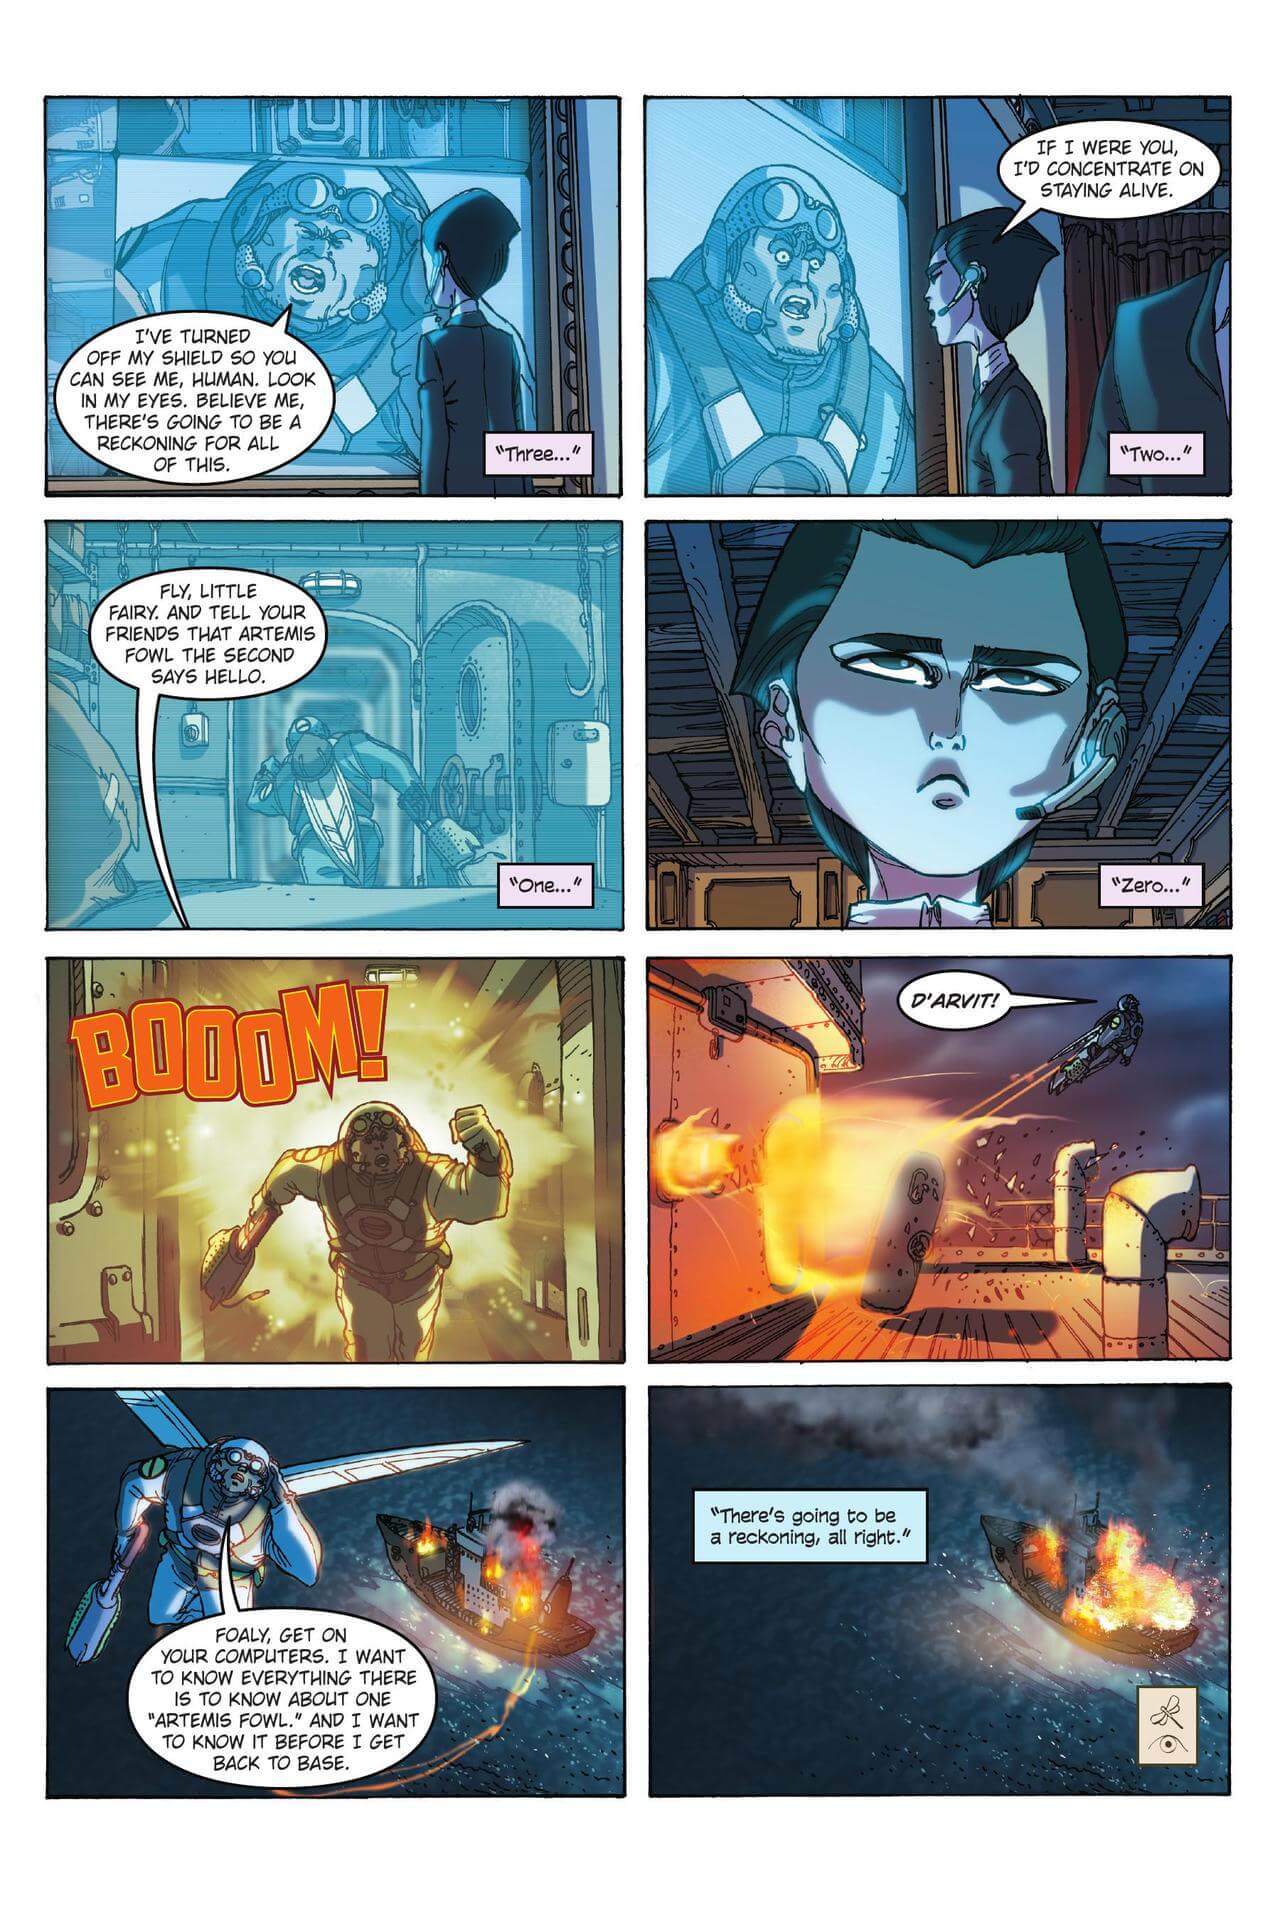 page 44 of artemis fowl the graphic novel